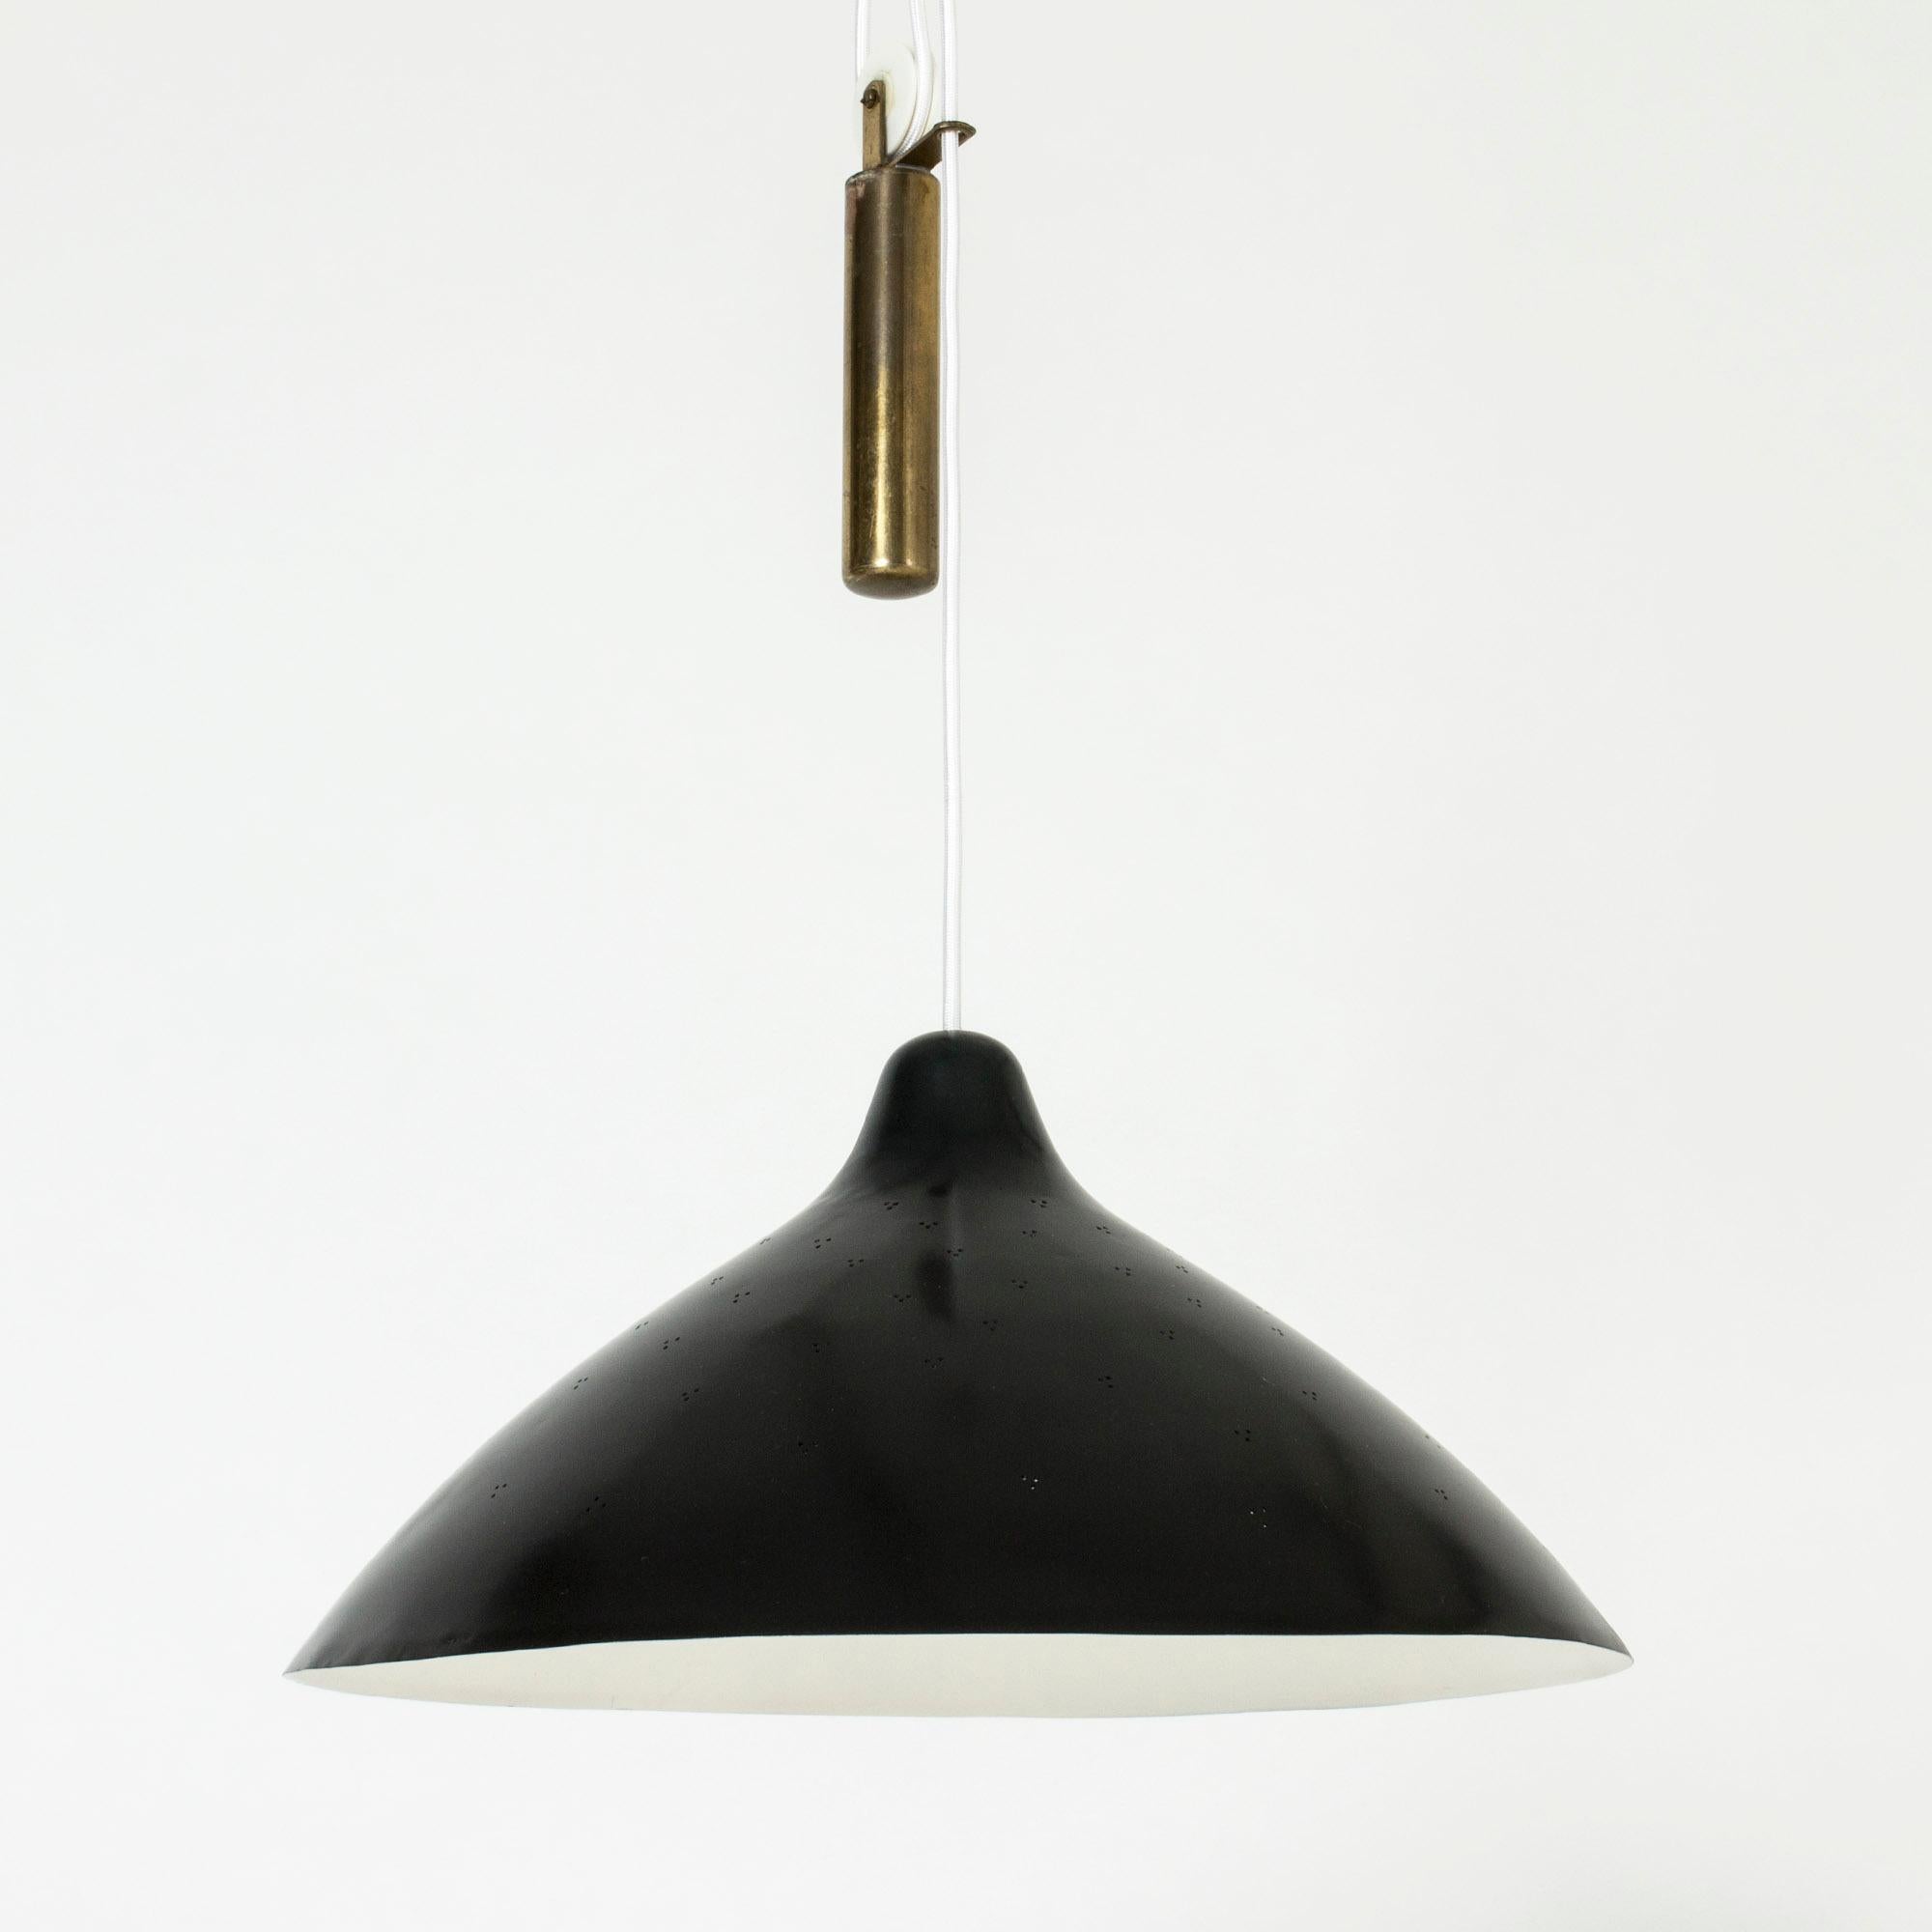 Elegant ceiling lamp by Lisa Johansson-Pape, made from brass with a black lacquered shade. Small perforated holes create a beautiful, subtle effect. A brass weight allows the height to be easily adjusted and makes a decorative detail.